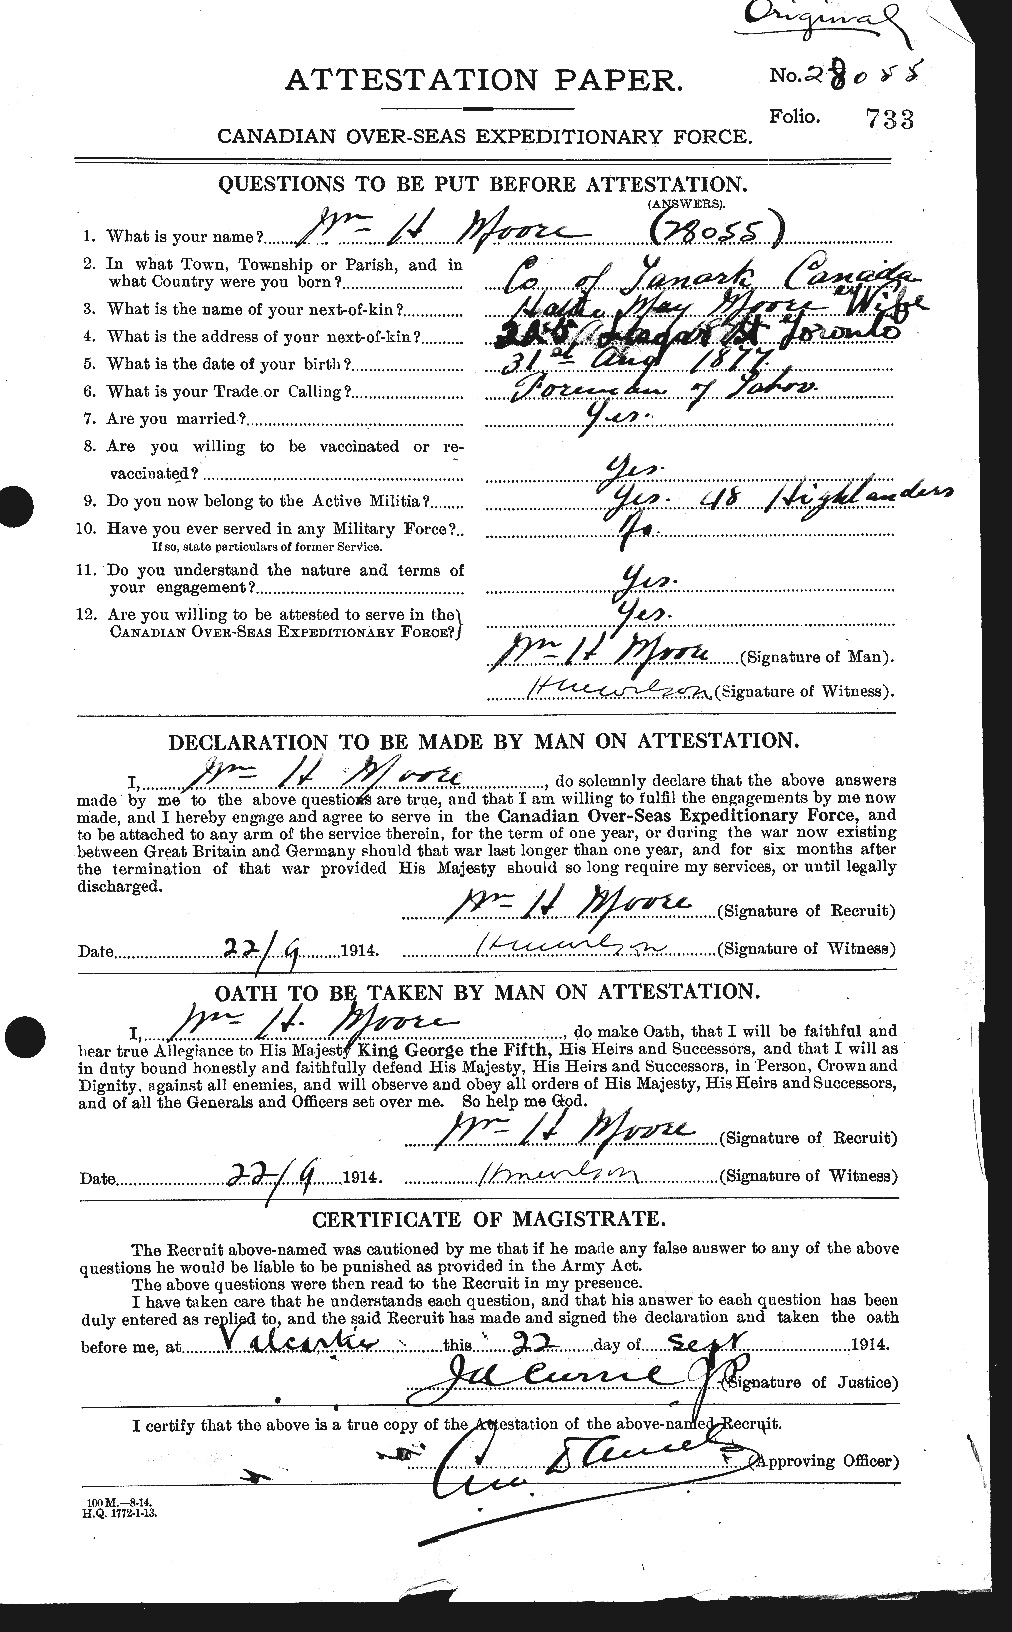 Personnel Records of the First World War - CEF 505817a